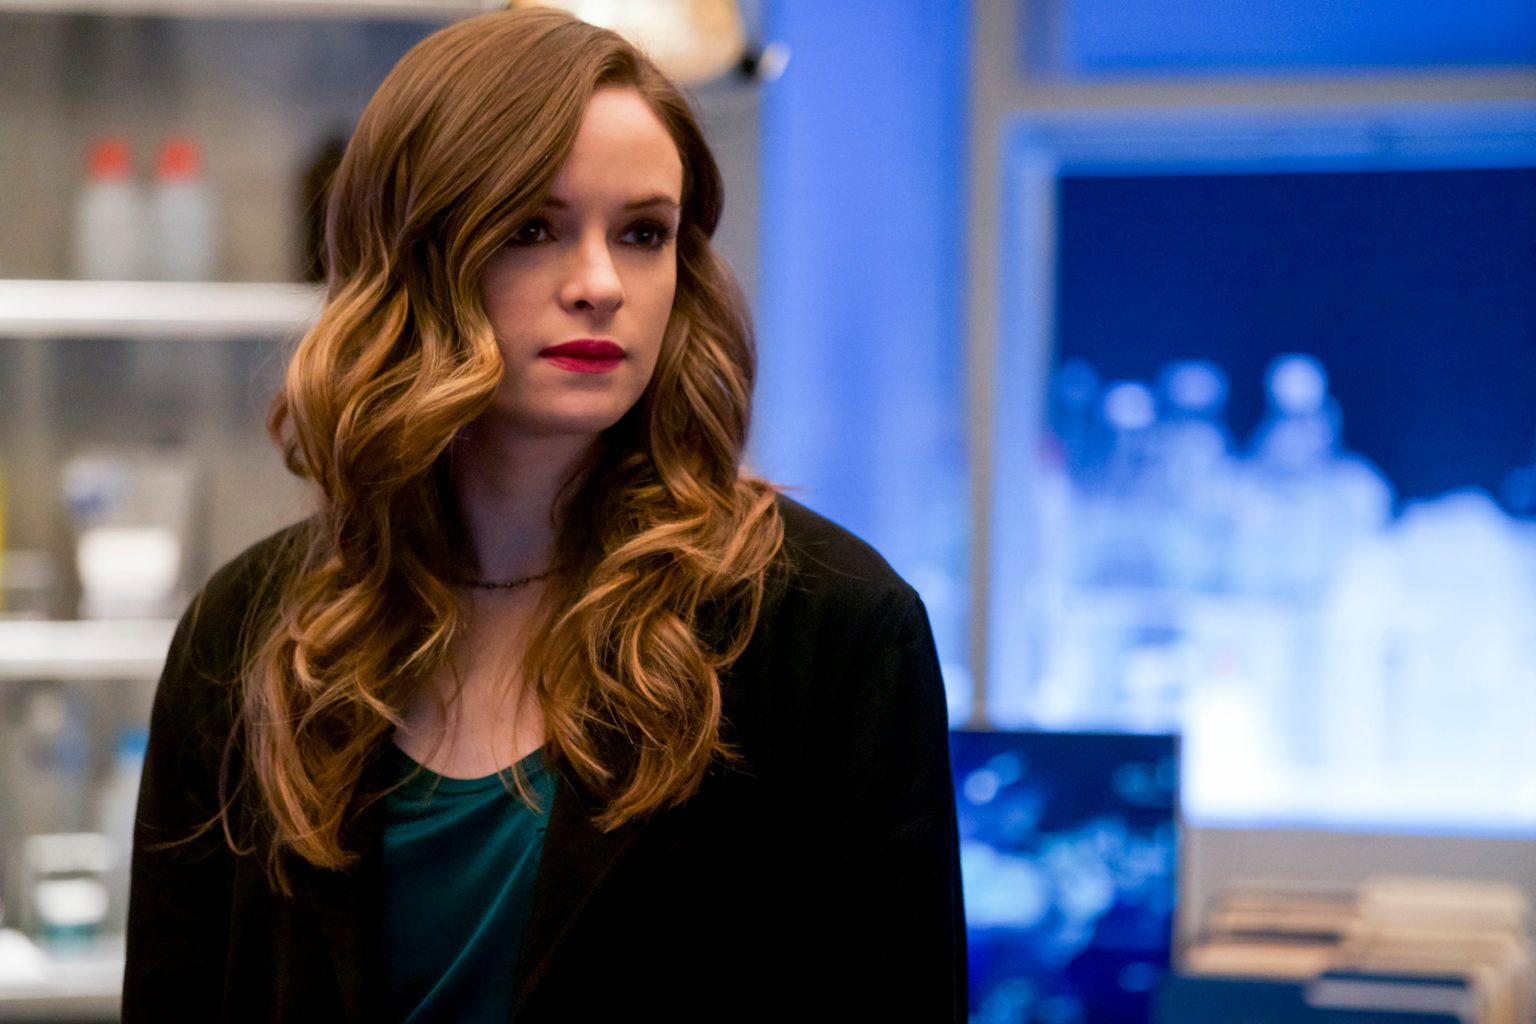 Danielle-Panabaker-in-The-Flash-1536x1024